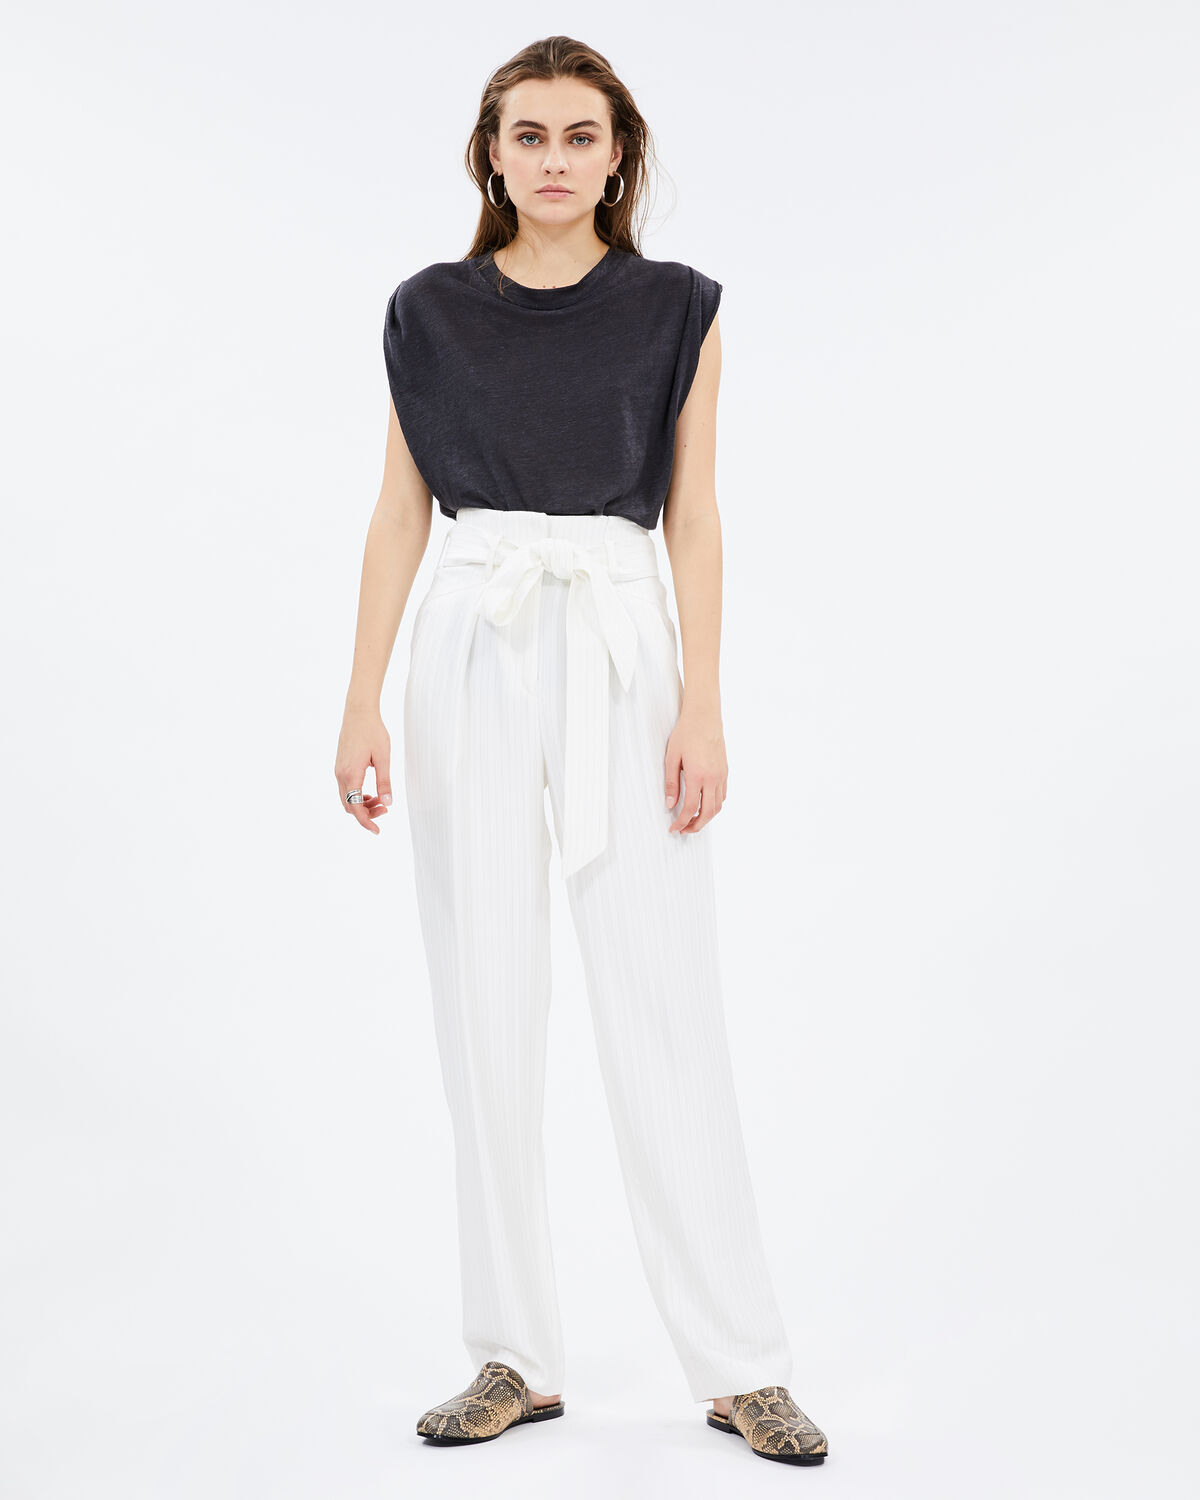 Photo of IRO Paris Cinca Pants Ecru - These Geometrically Shaped Pants Are Distinguished By Their Waist Belt. Their Plus? Their Fluidity Which Will Bring A Casual Touch To Your Outfits In Summer. Wear Them With A Black Top And A Pair Of Sandals For A Fresh And Sunny Silhouette. Trousers